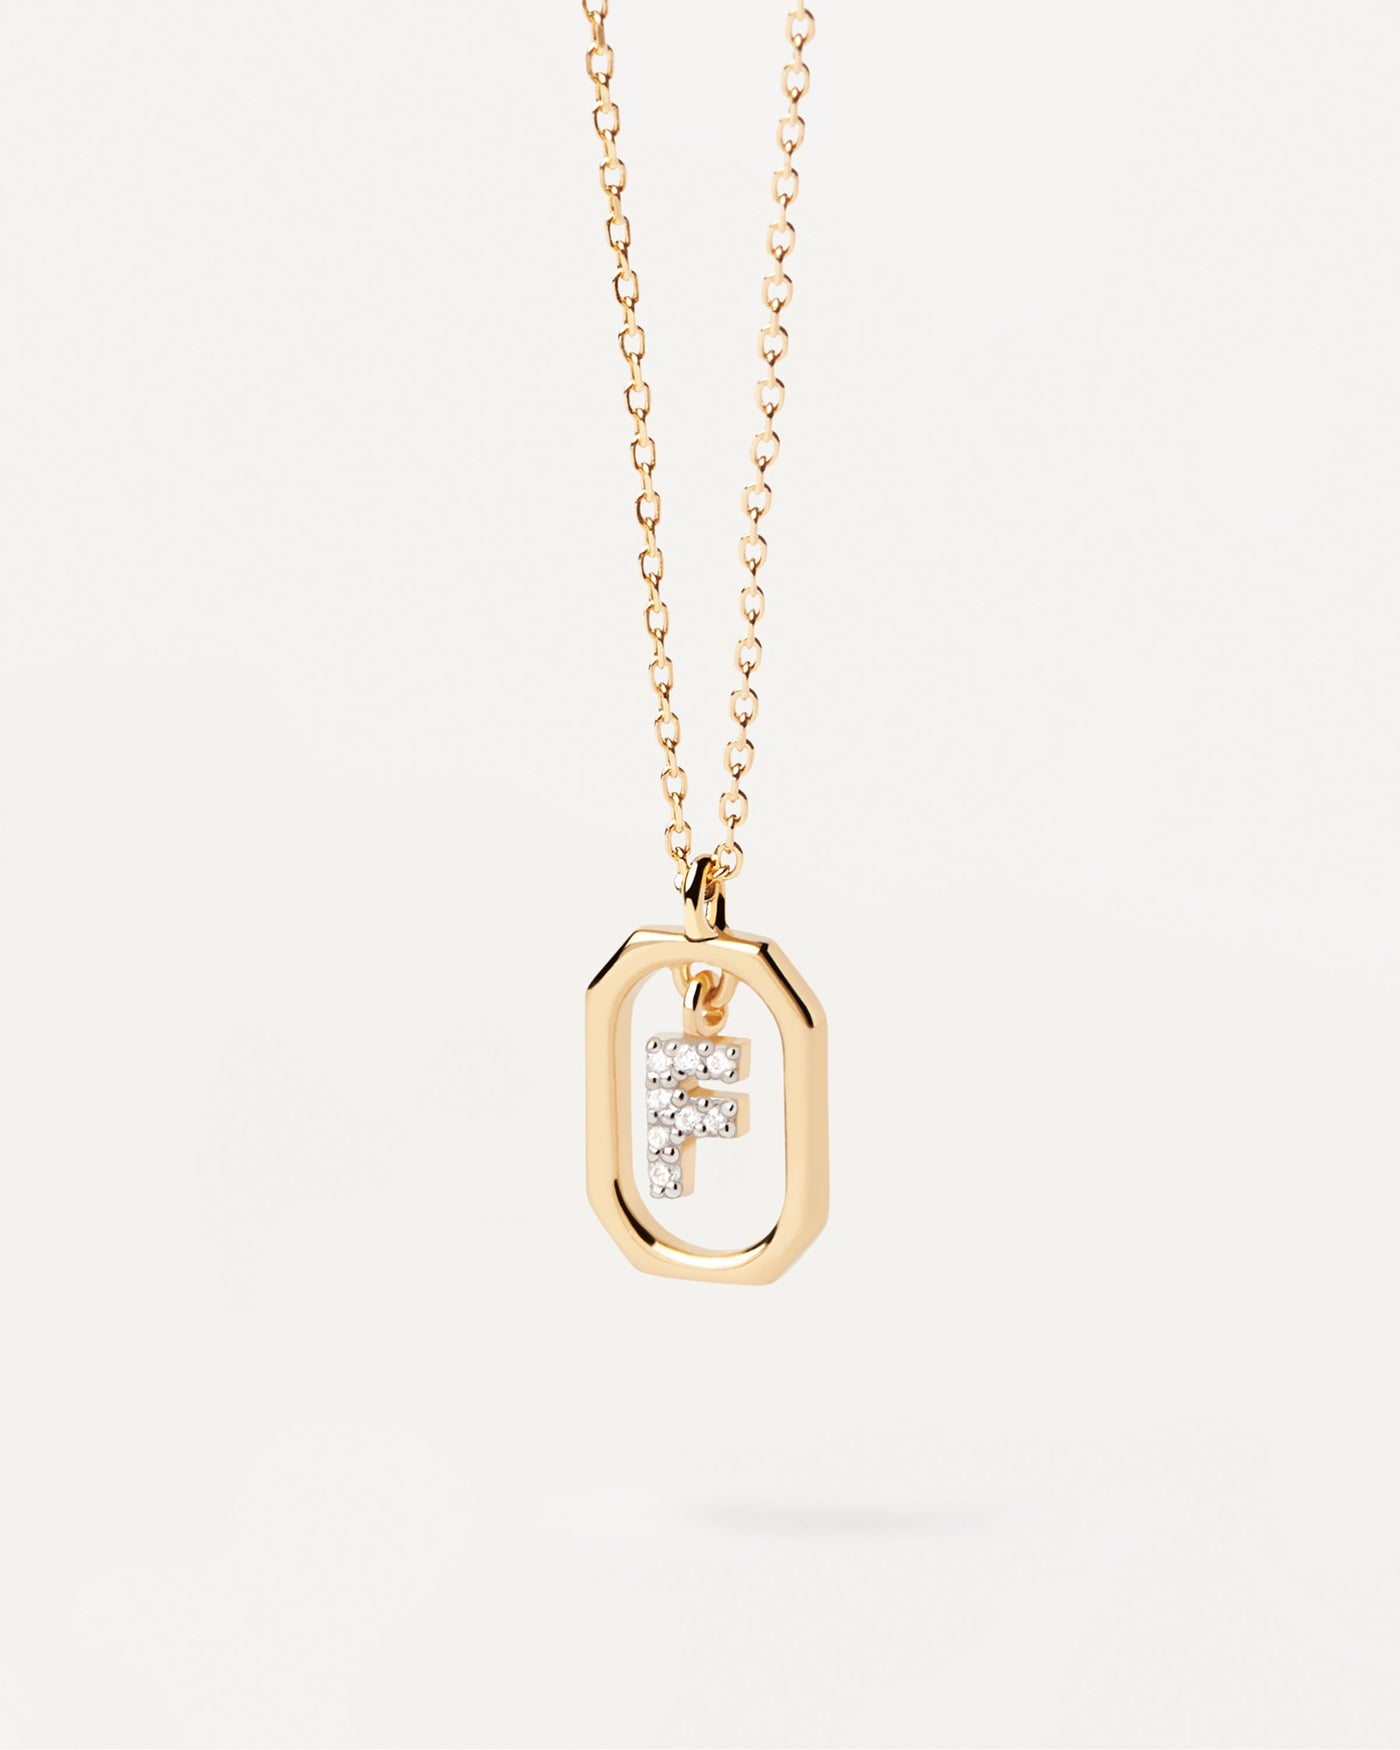 2023 Selection | Mini Letter F Necklace. Small initial F necklace in zirconia inside gold-plated silver octagonal pendant. Get the latest arrival from PDPAOLA. Place your order safely and get this Best Seller. Free Shipping.